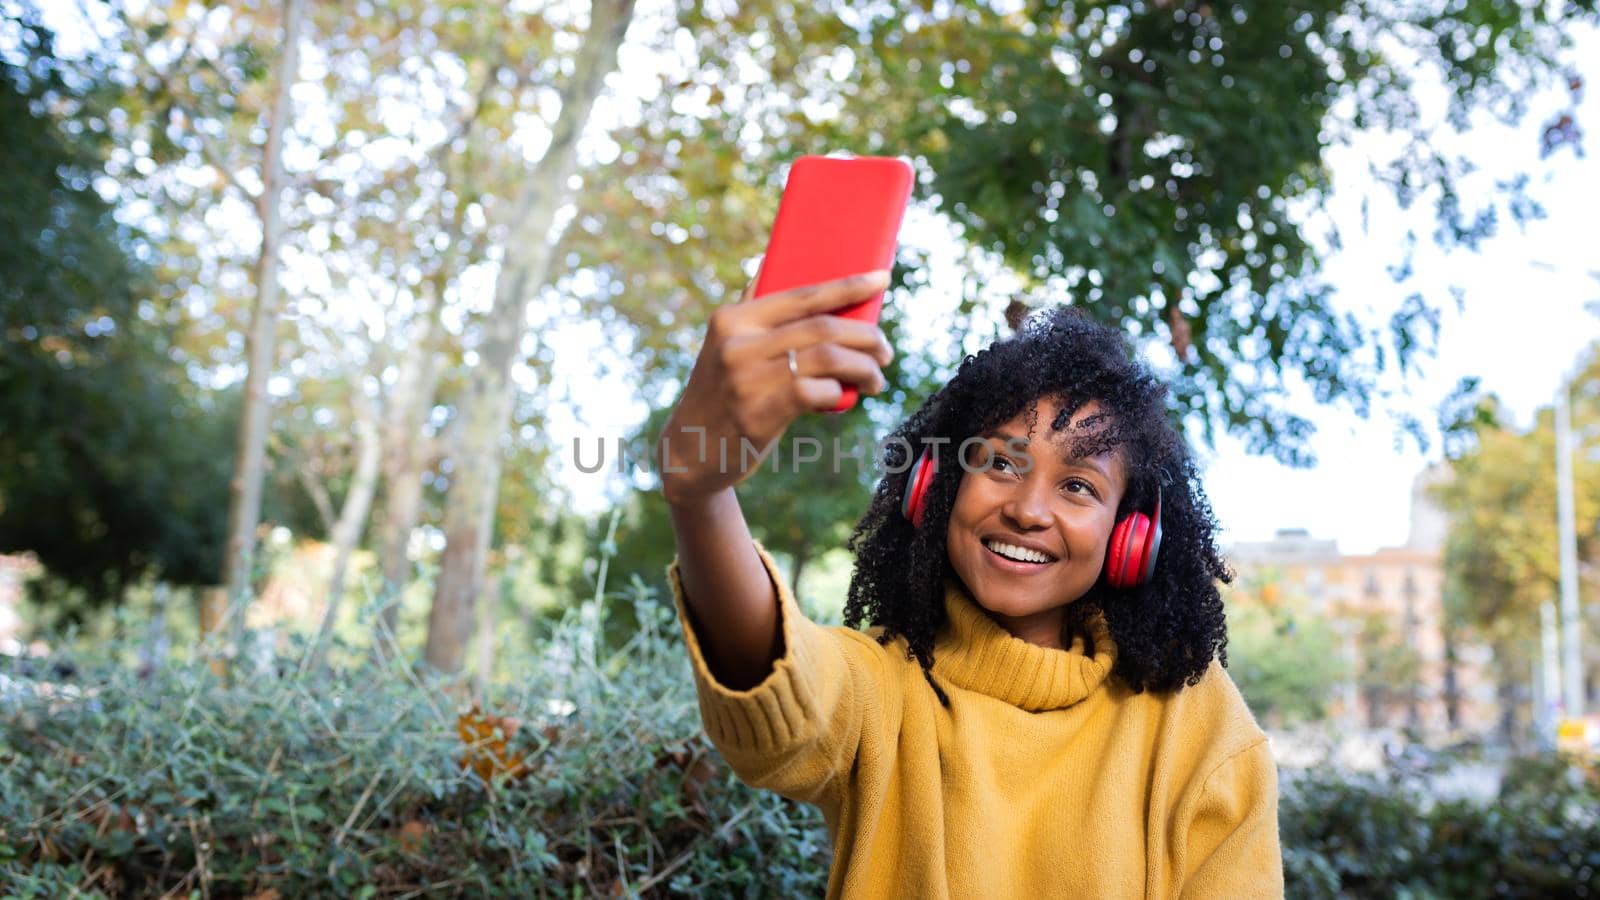 Panoramic image of young African American woman taking a selfie with smartphone in a park. Copy space. Lifestyle and social media concept.